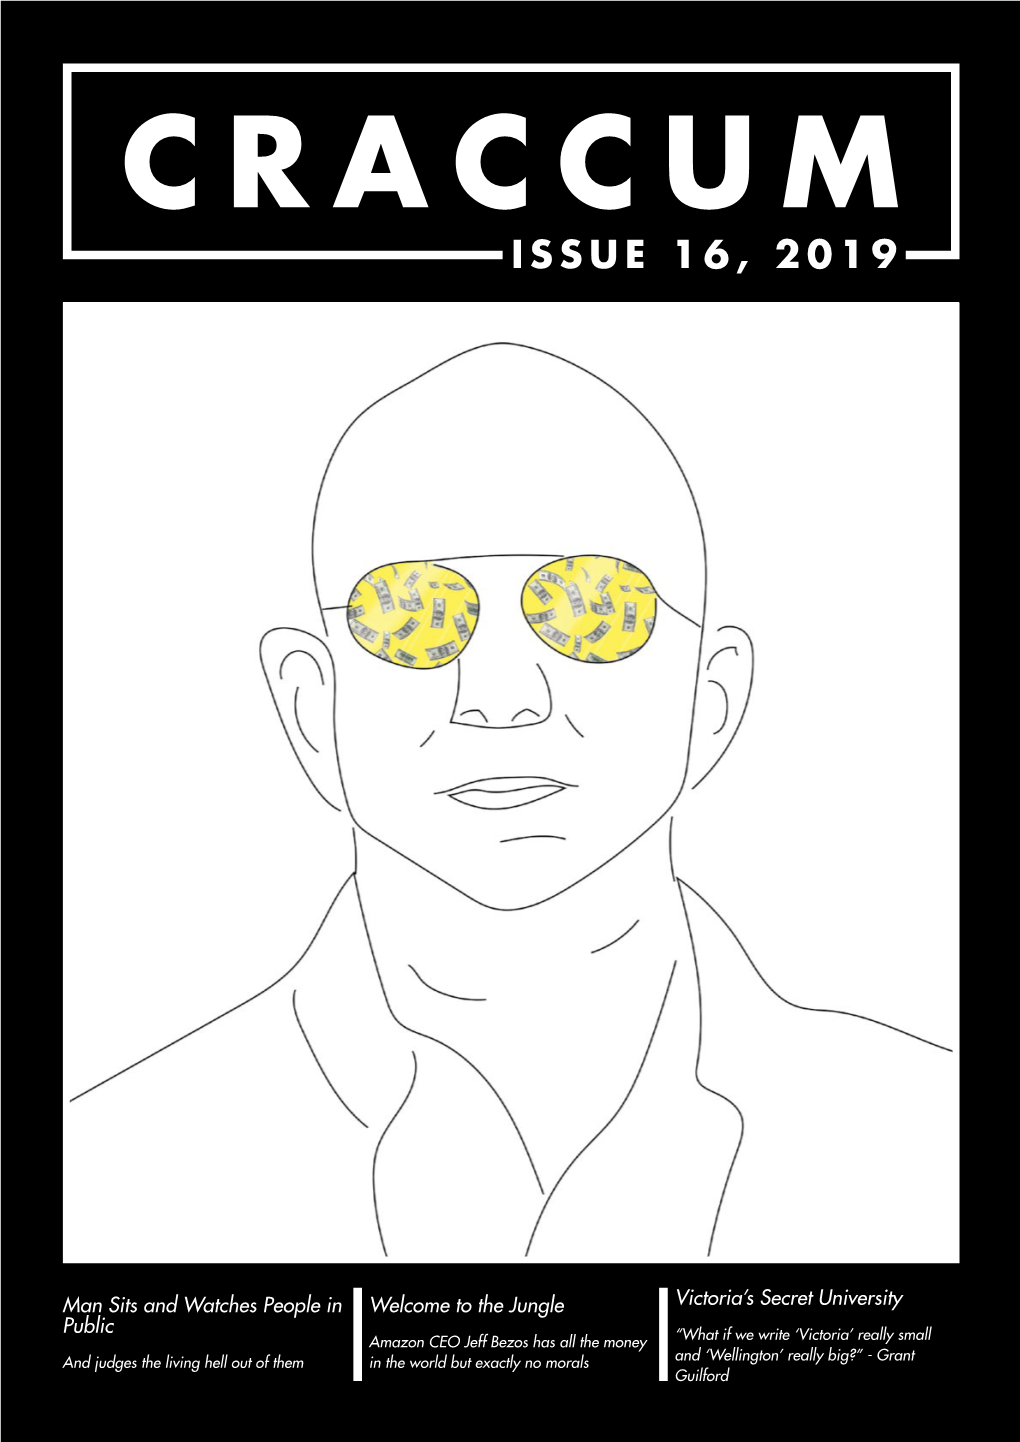 Issue 16, 2019